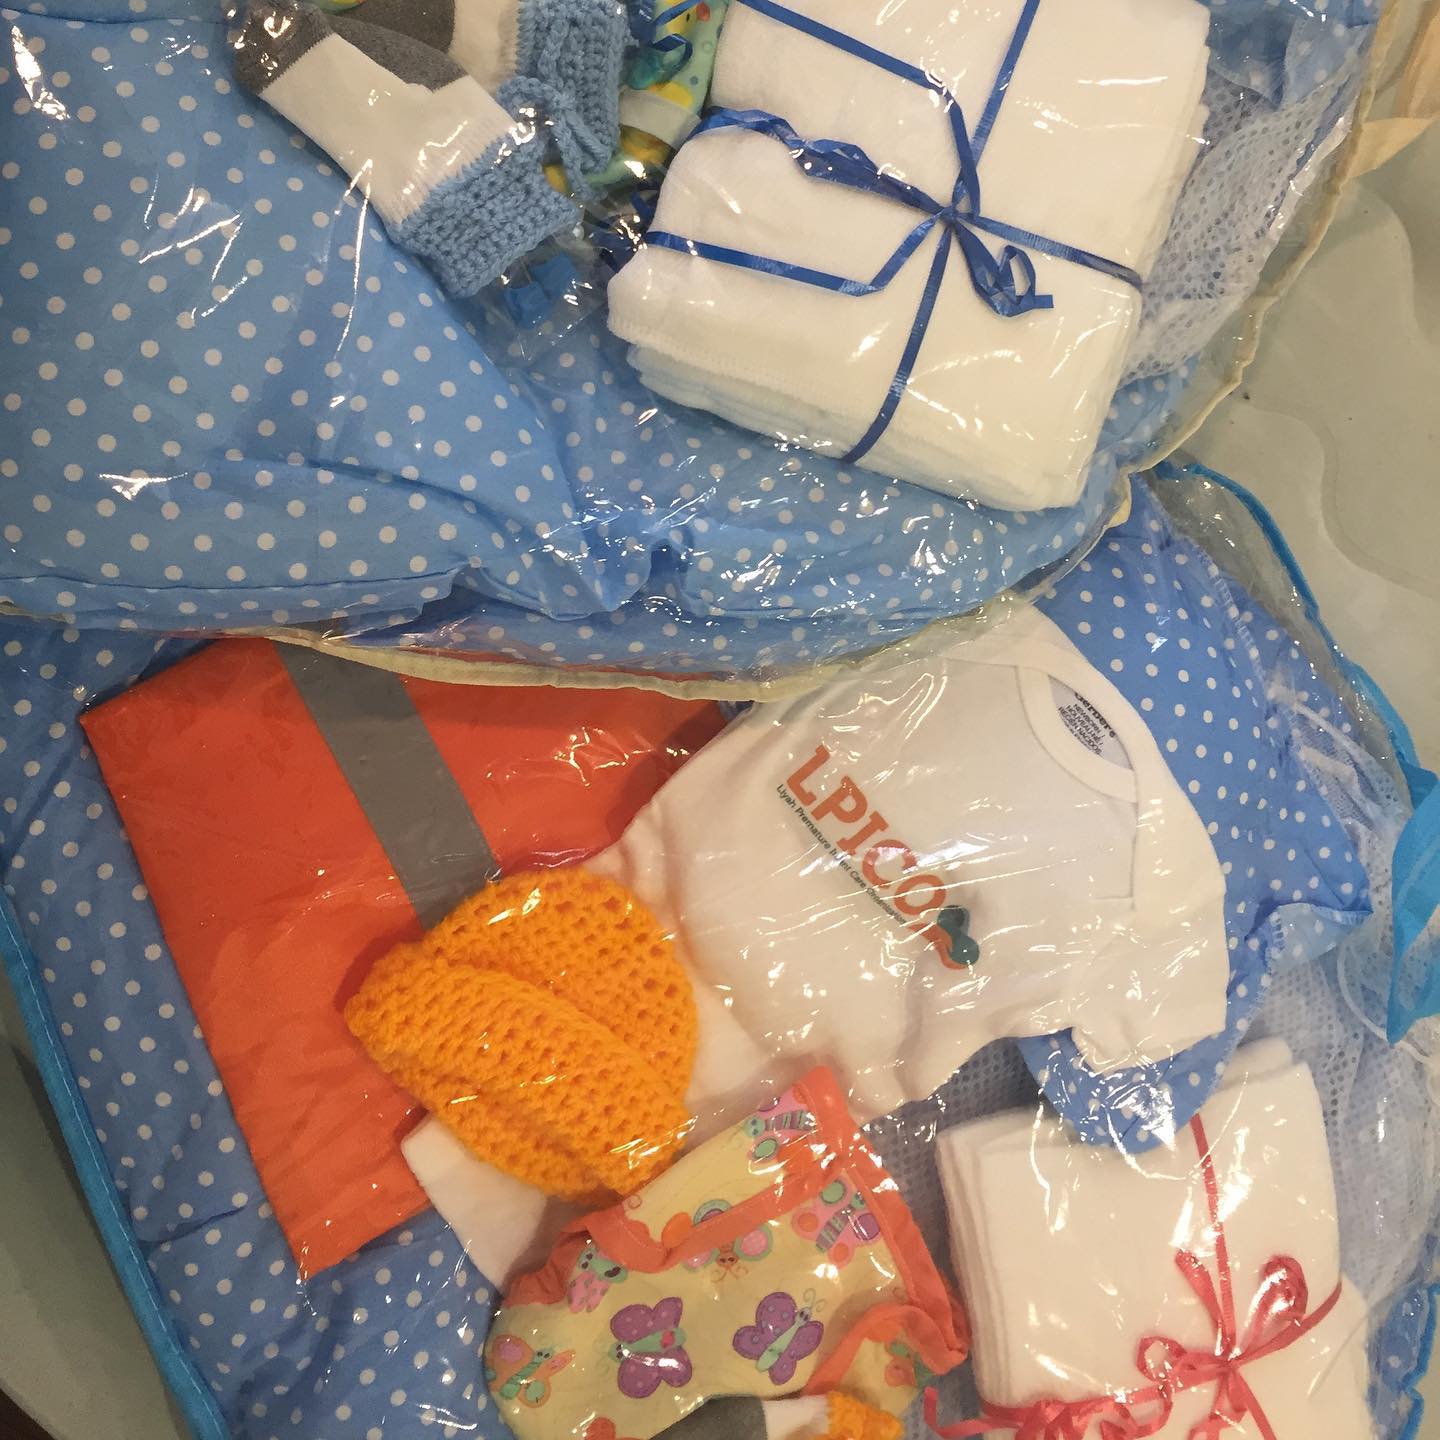 Thanks to your support, preemie parents in low income regions will receive simple resources to give their babies a better chance 💖. Thank You. #preemiecarebags #preemiestrong #micropreemies #nicumom #nicunurses